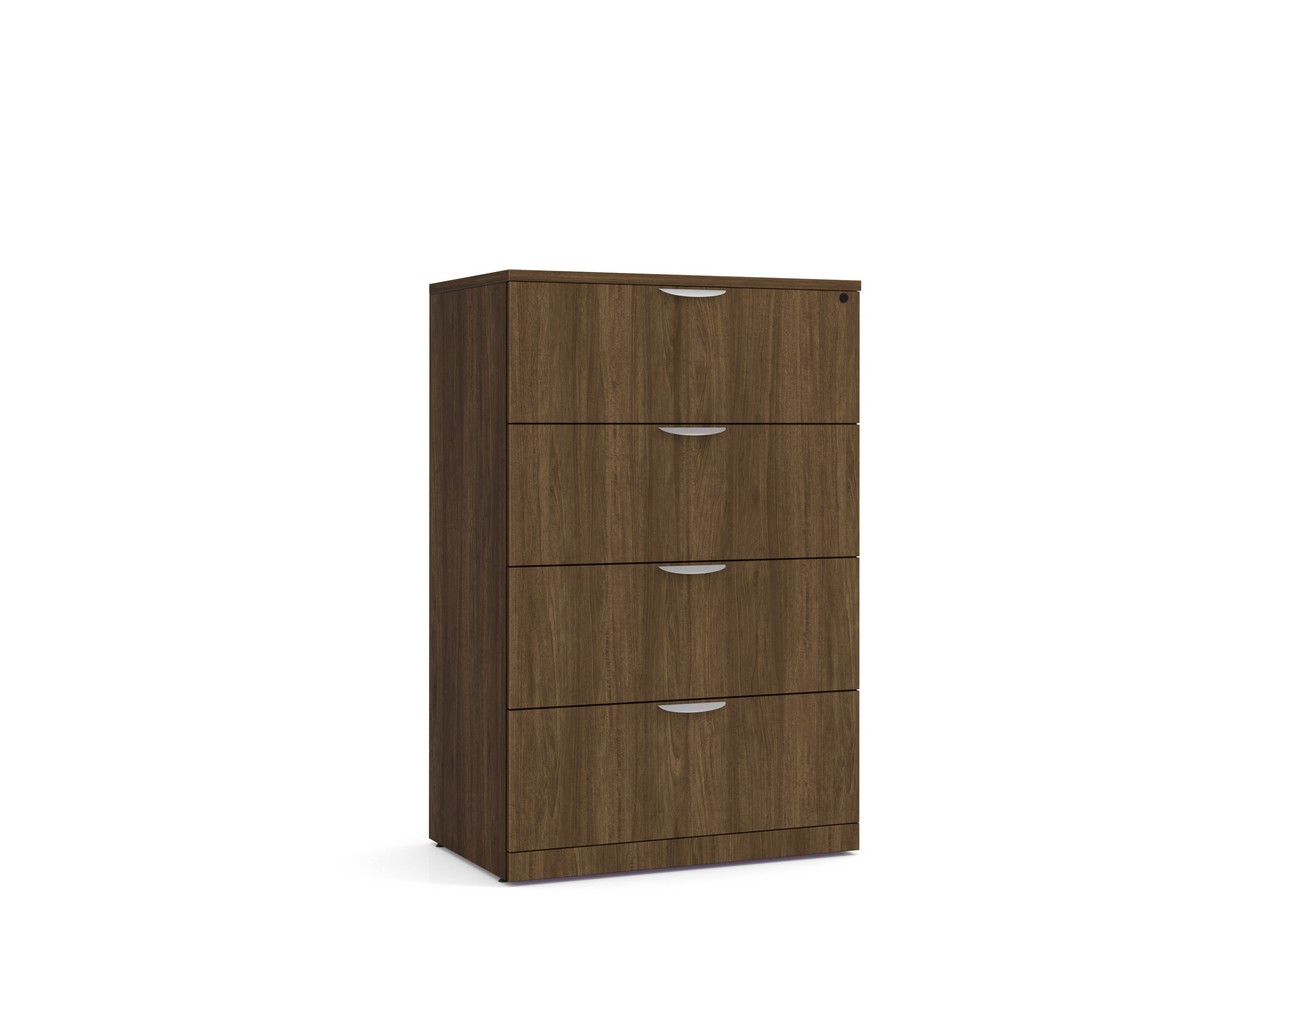 4 Drawer Lateral Filing Cabinet with Modern Walnut Finish